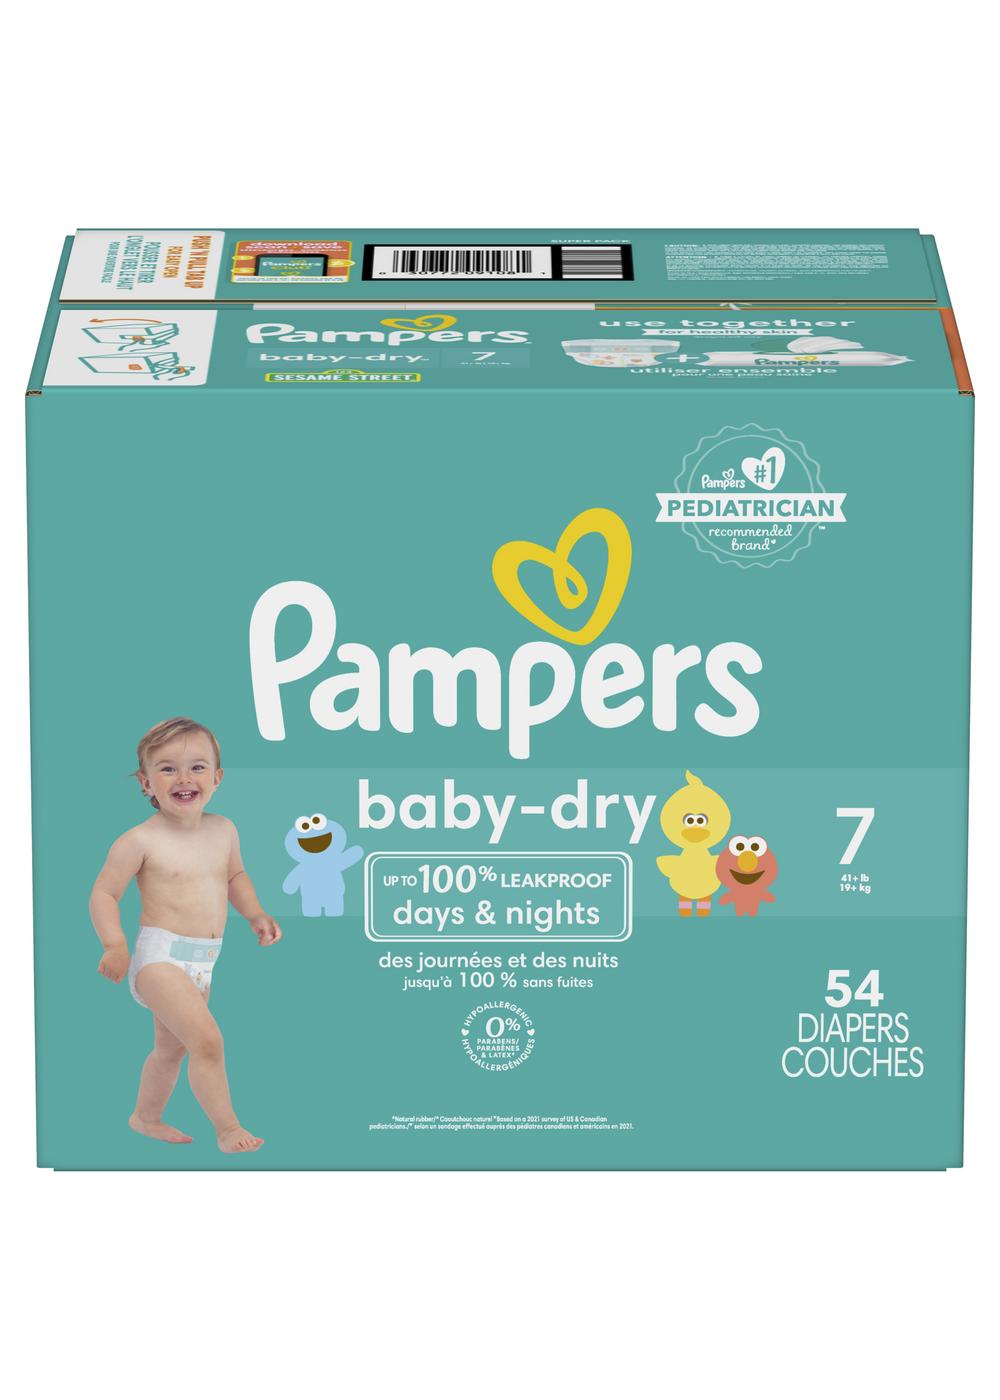 Pampers Baby-Dry Baby Diapers - Size 7; image 5 of 11